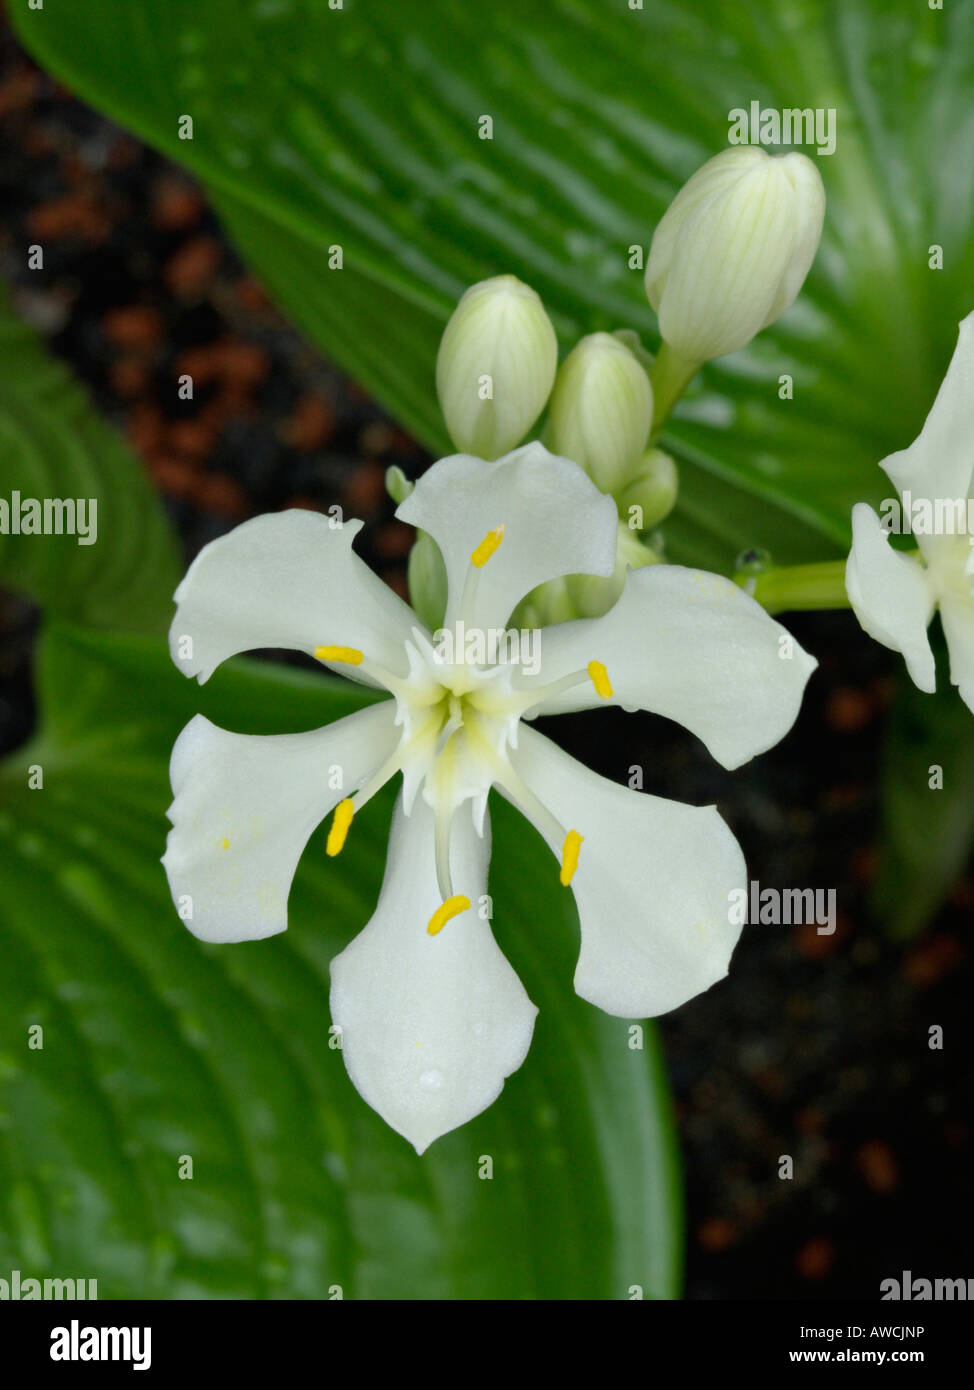 Cardwell lily (Proiphys amboinensis) Stock Photo